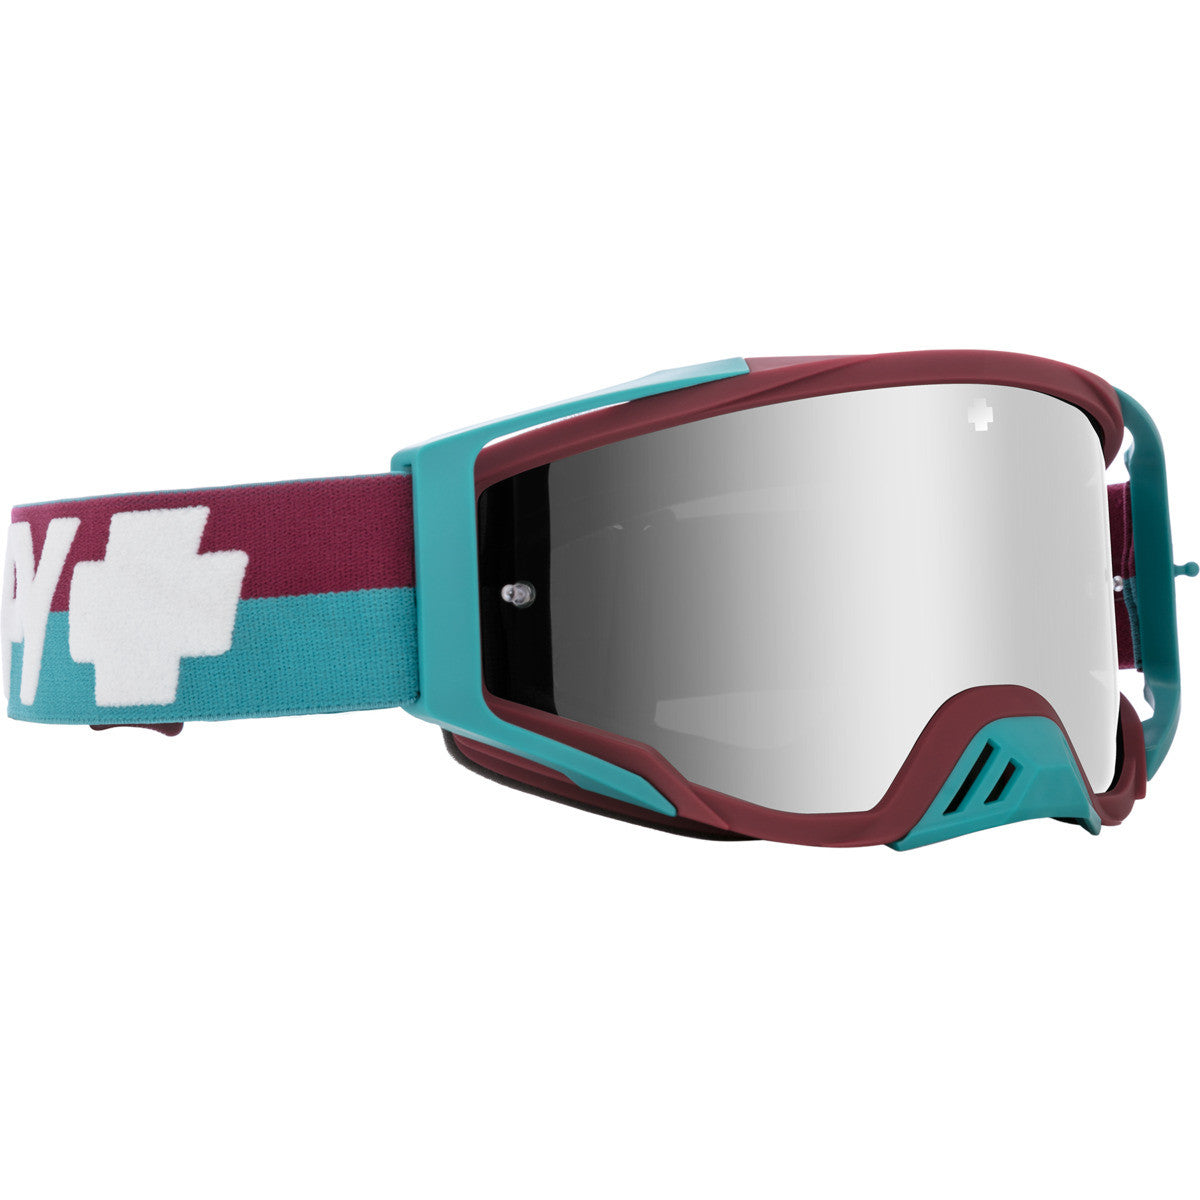 Spy Foundation Plus Goggles  Bolt Teal Large-Extra Large L-XL 57-60